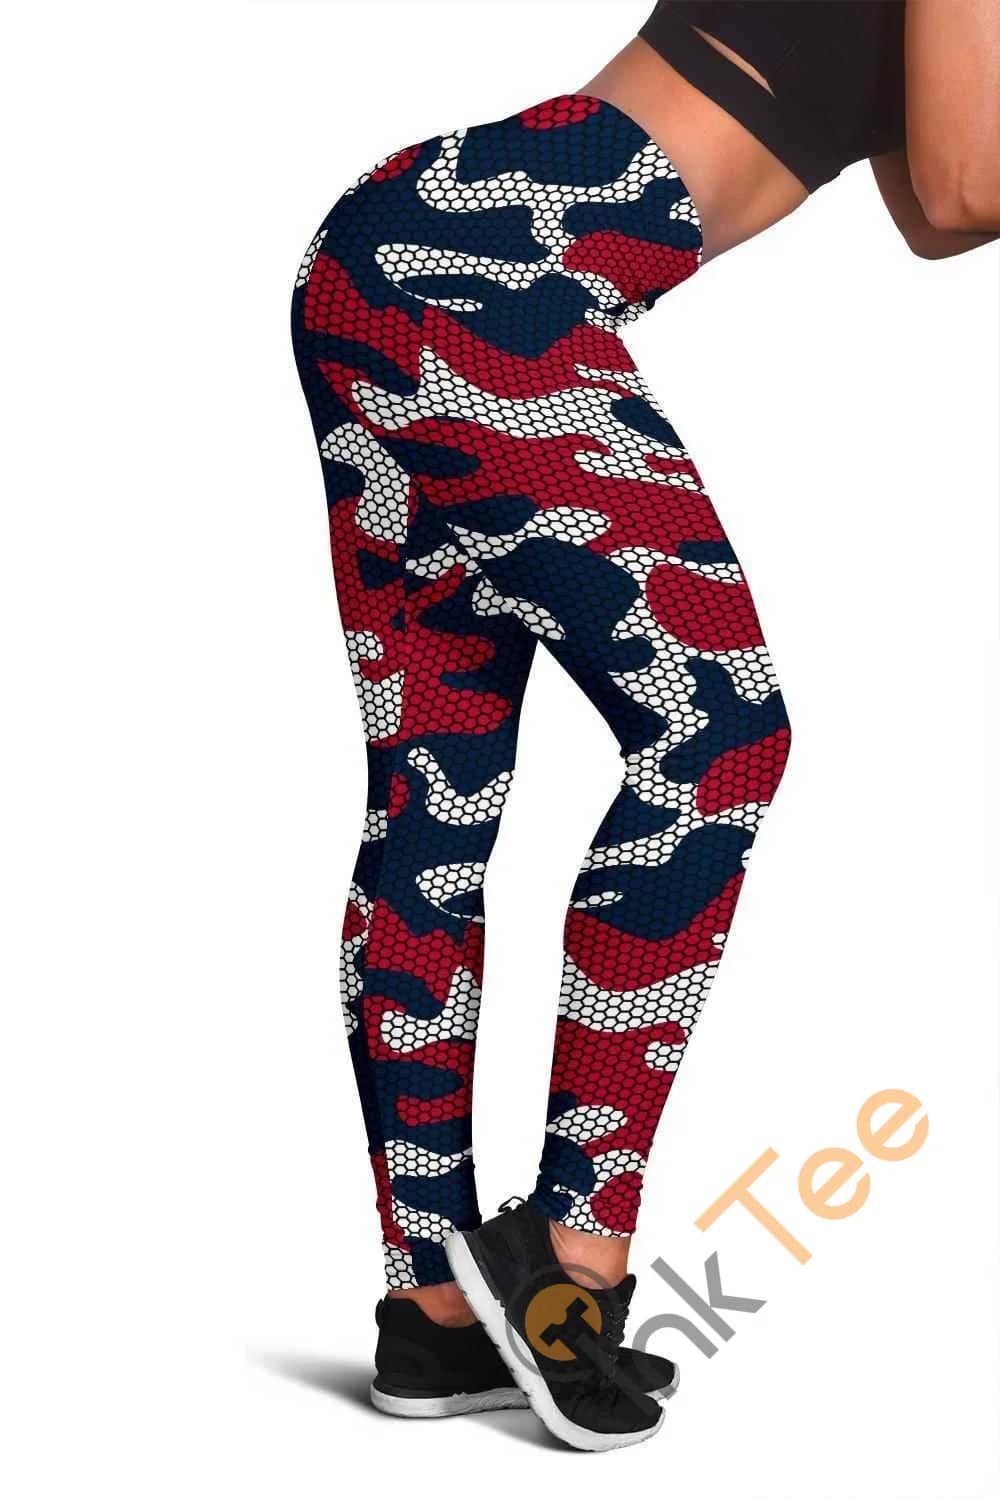 New England Patriots Inspired Hex Camo 3D All Over Print For Yoga Fitness Fashion Women's Leggings